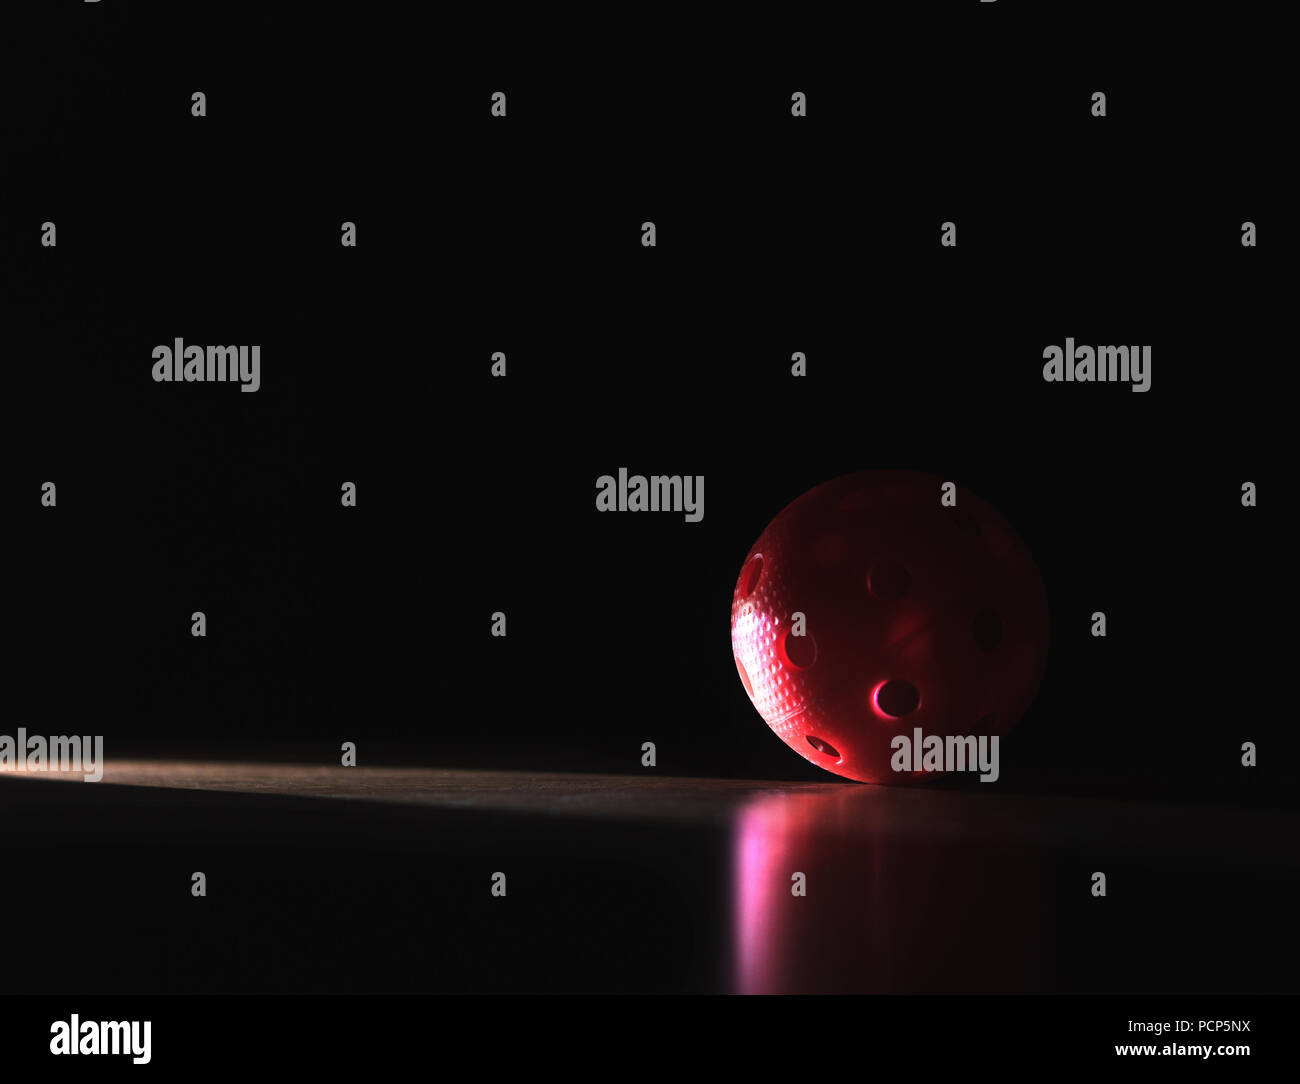 Black and dark floorball background with negative copy space. Red ball in spotlight in shadow. Stock Photo